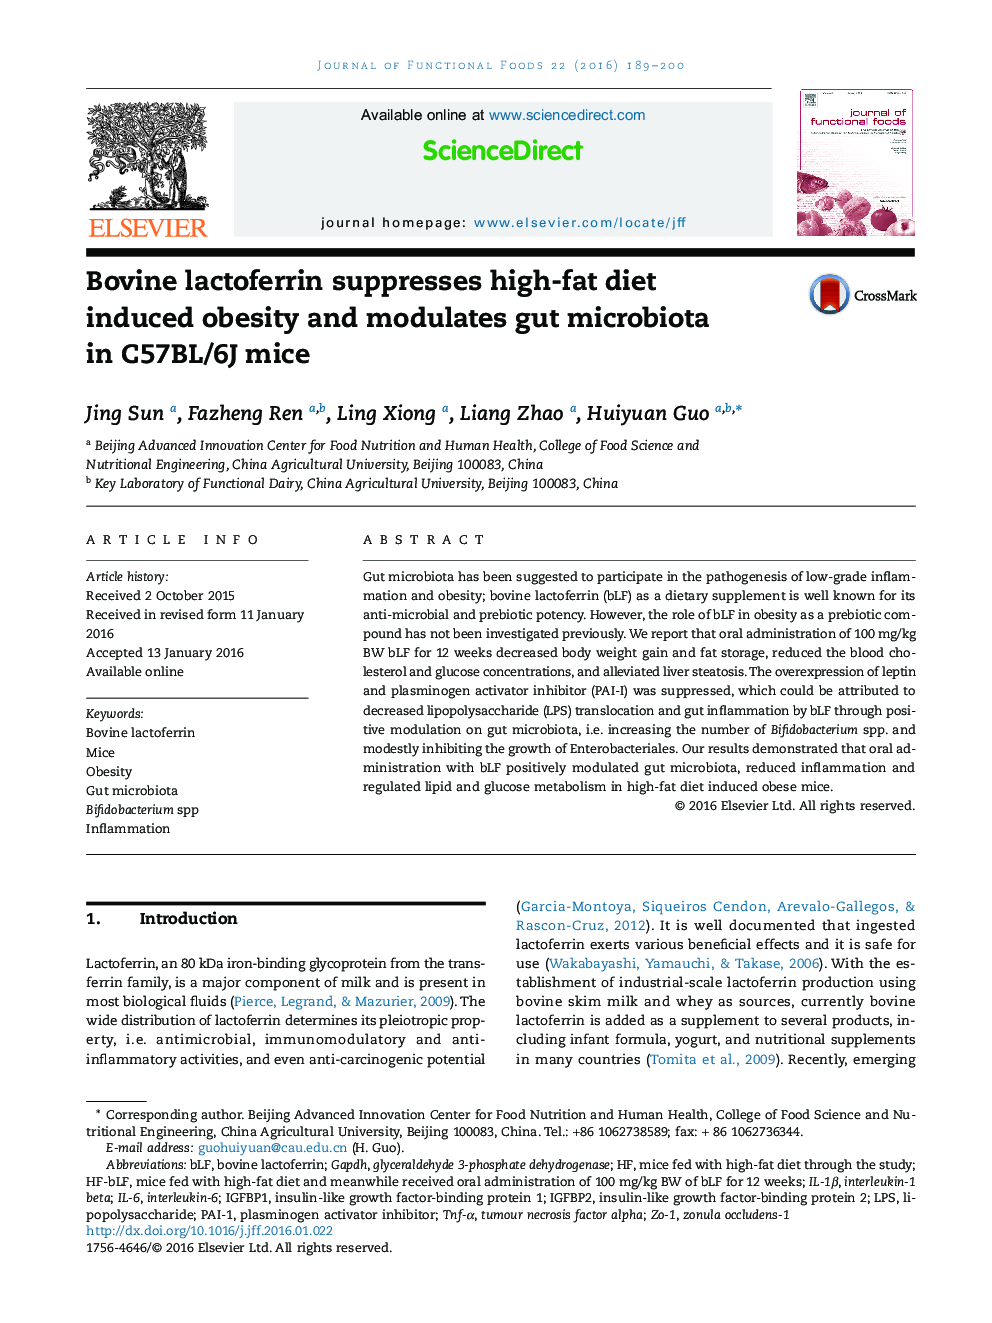 Bovine lactoferrin suppresses high-fat diet induced obesity and modulates gut microbiota in C57BL/6J mice